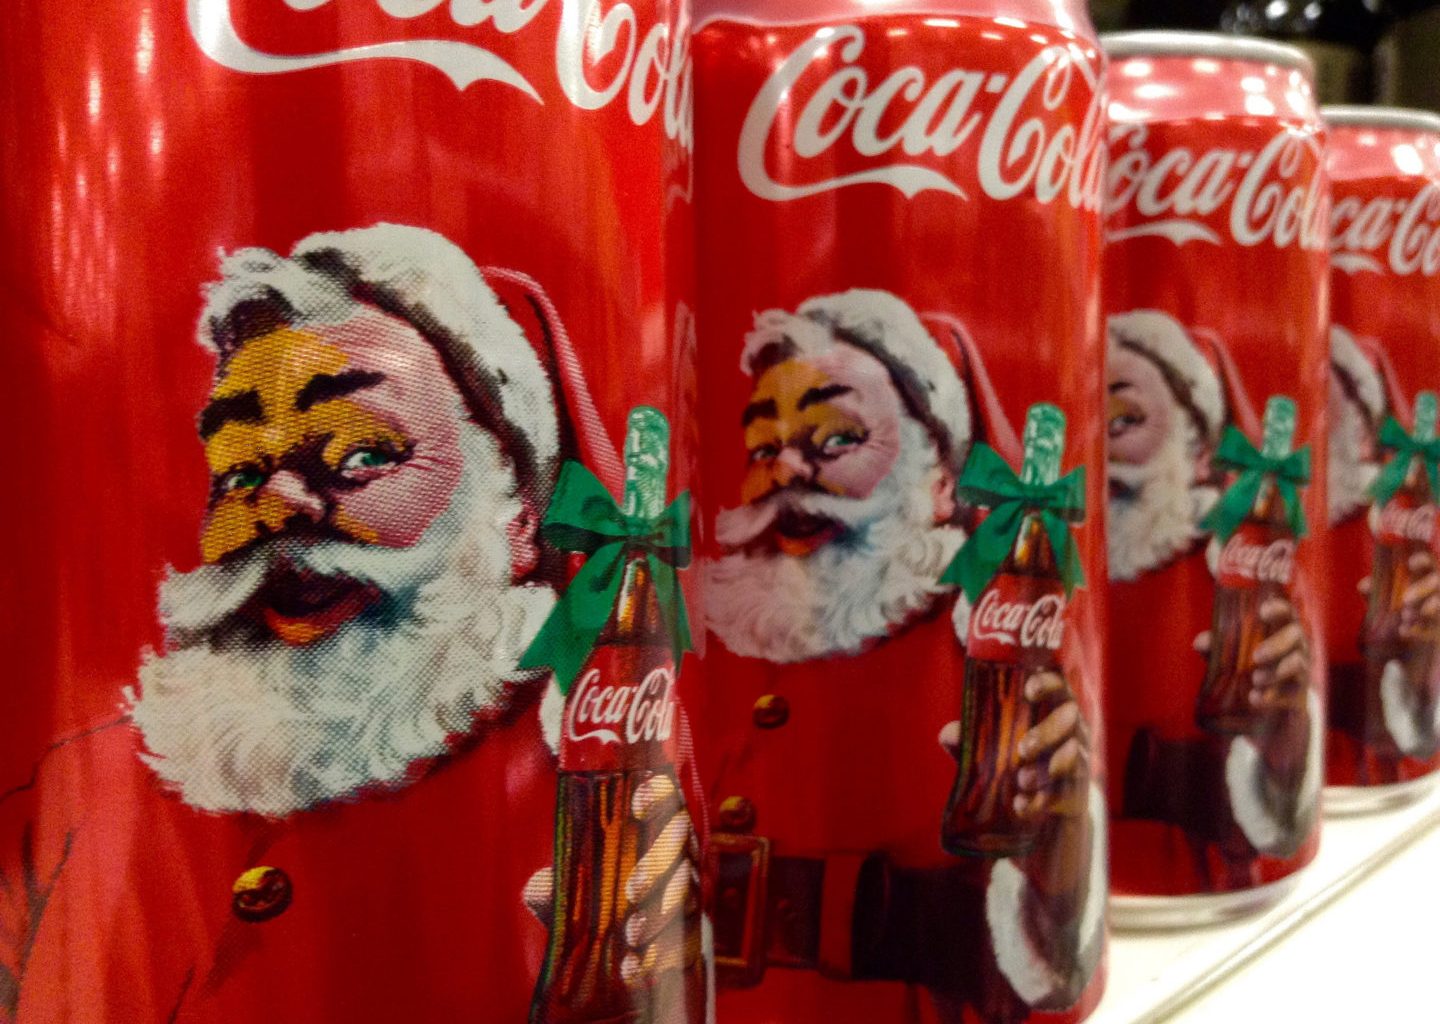 No, Santa Claus was not first dressed in red by Coca-Cola 3